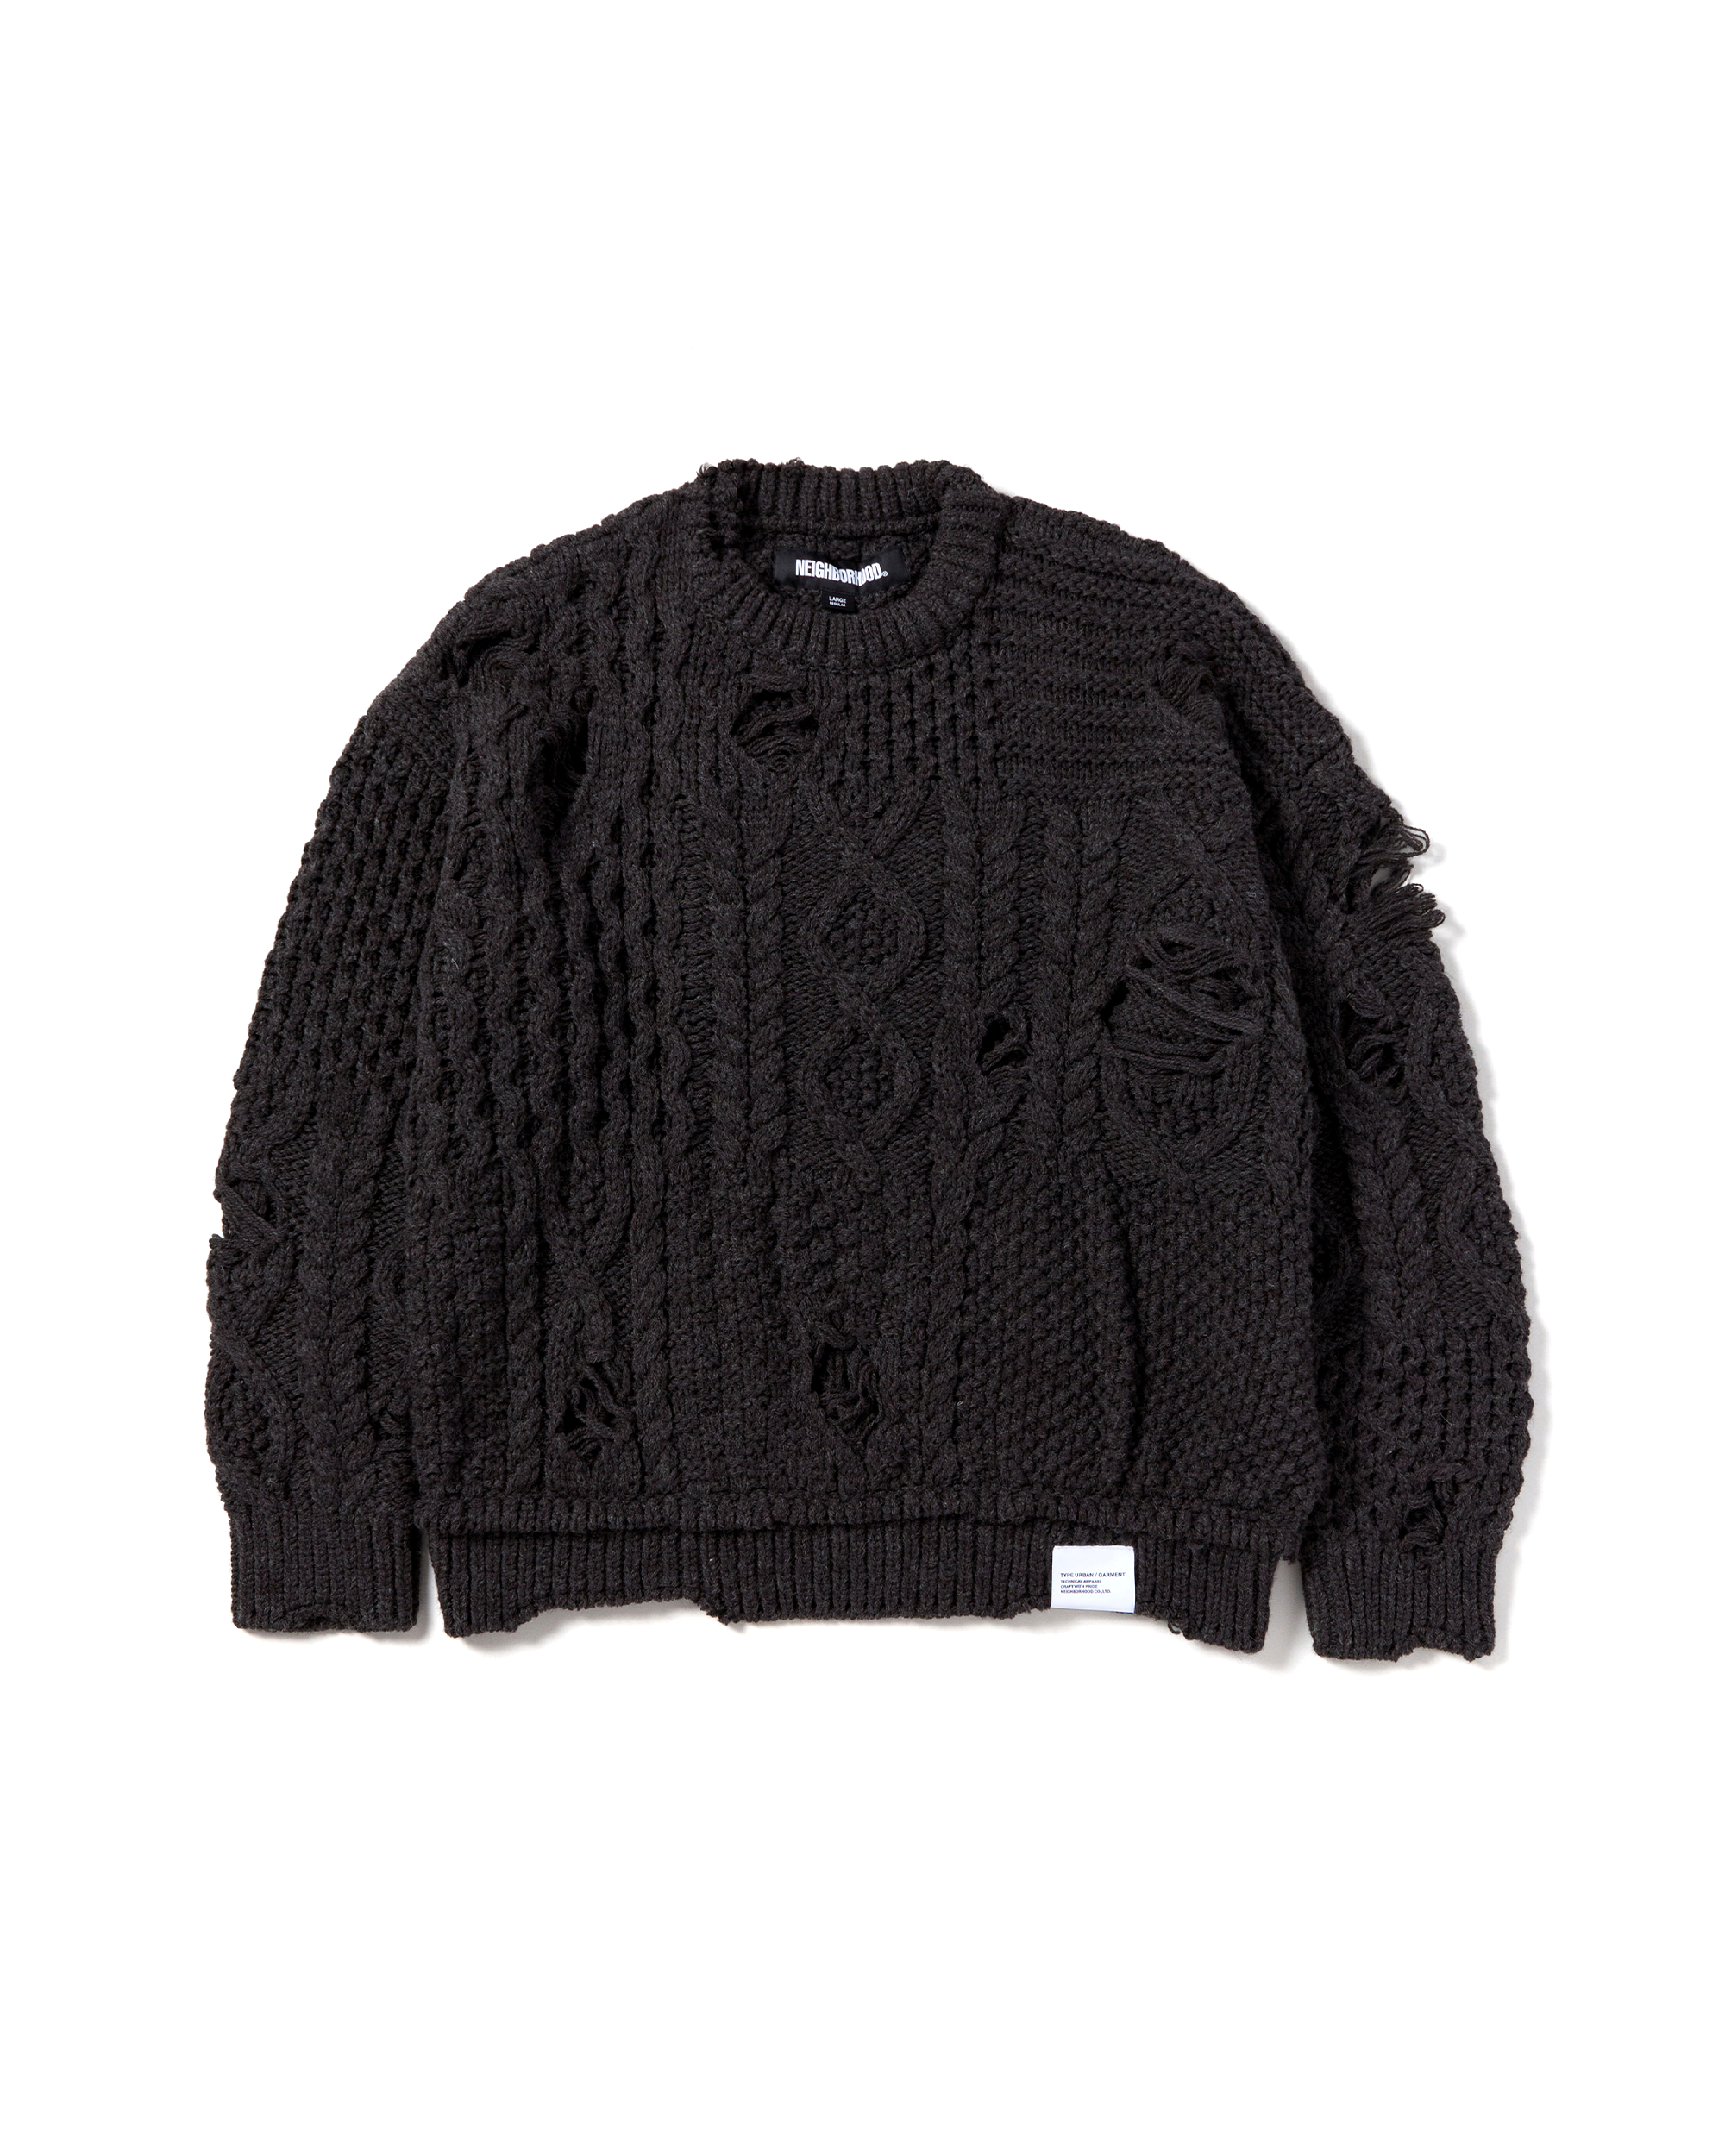 Patchwork Savage Sweater - Charcoal